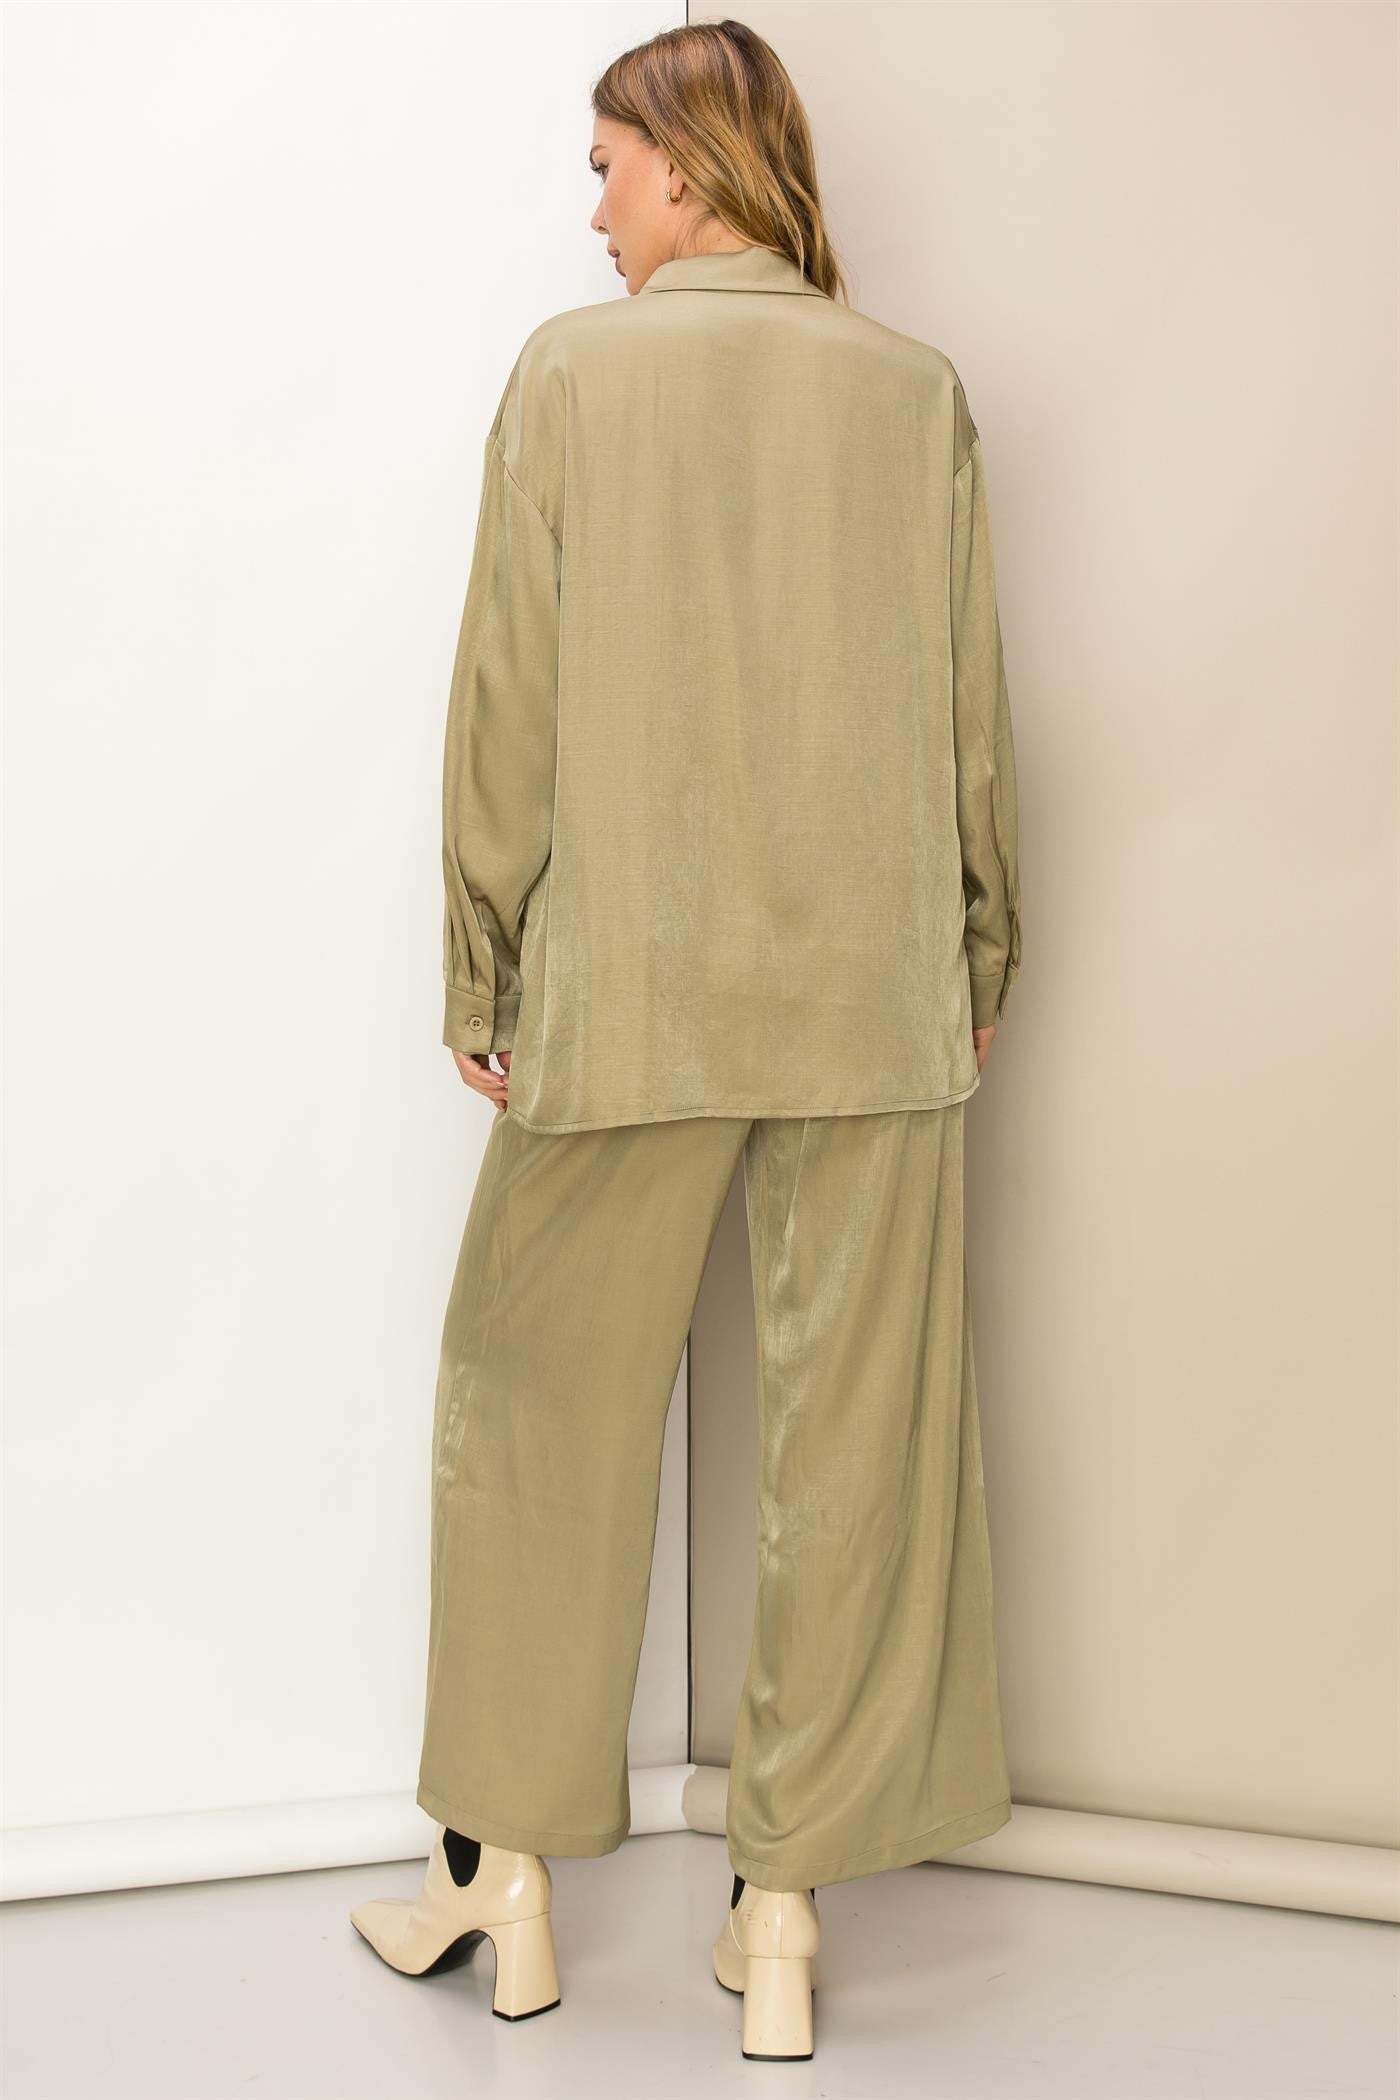 HER Pant Suit in Olive